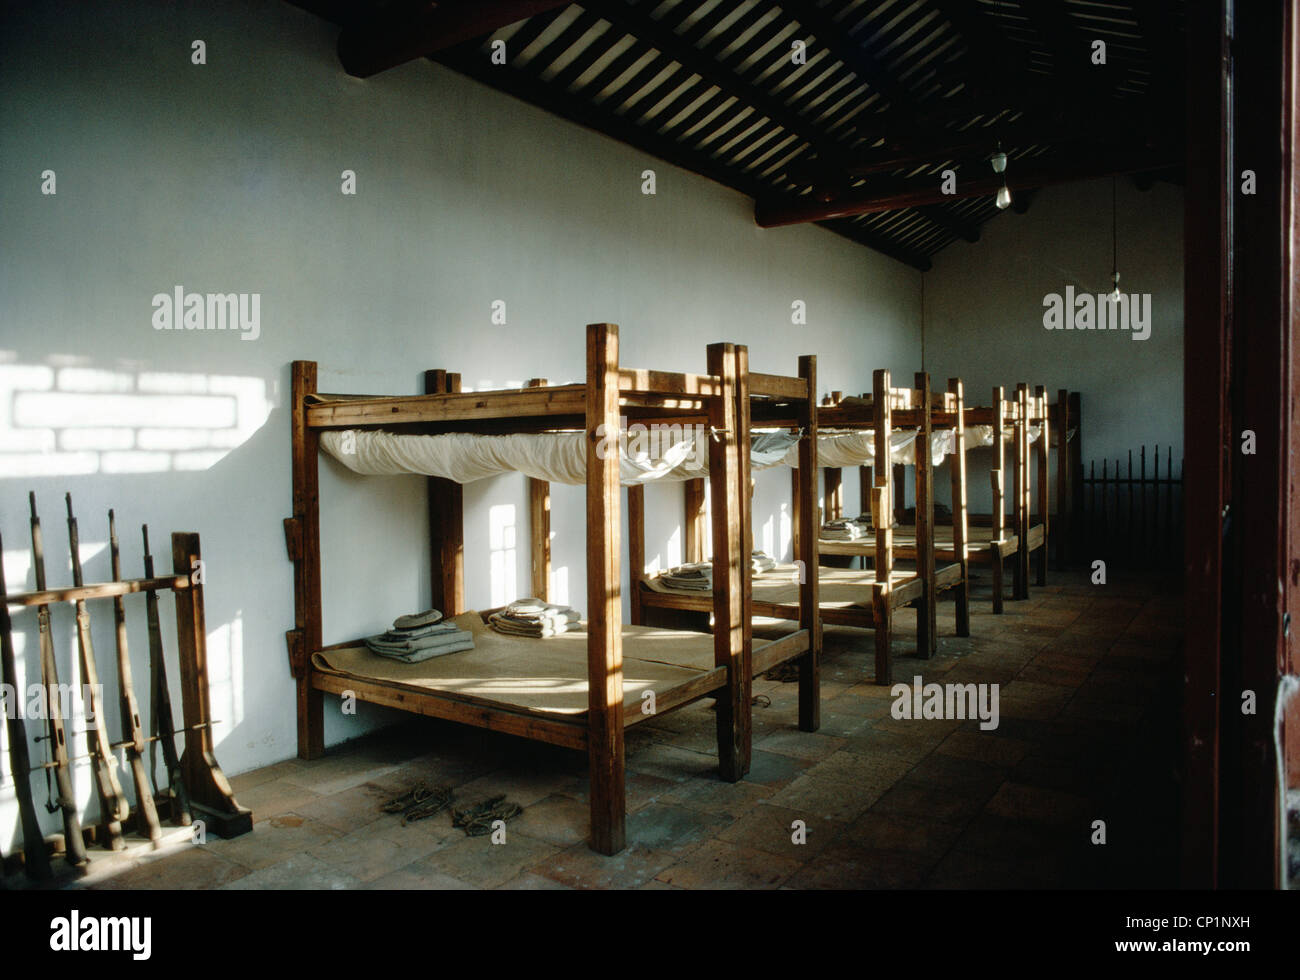 Barrack room of temple associated with Mao Zedong. Peasant Movement  Institute, Guangzhou (Canton) December 1982 Stock Photo - Alamy